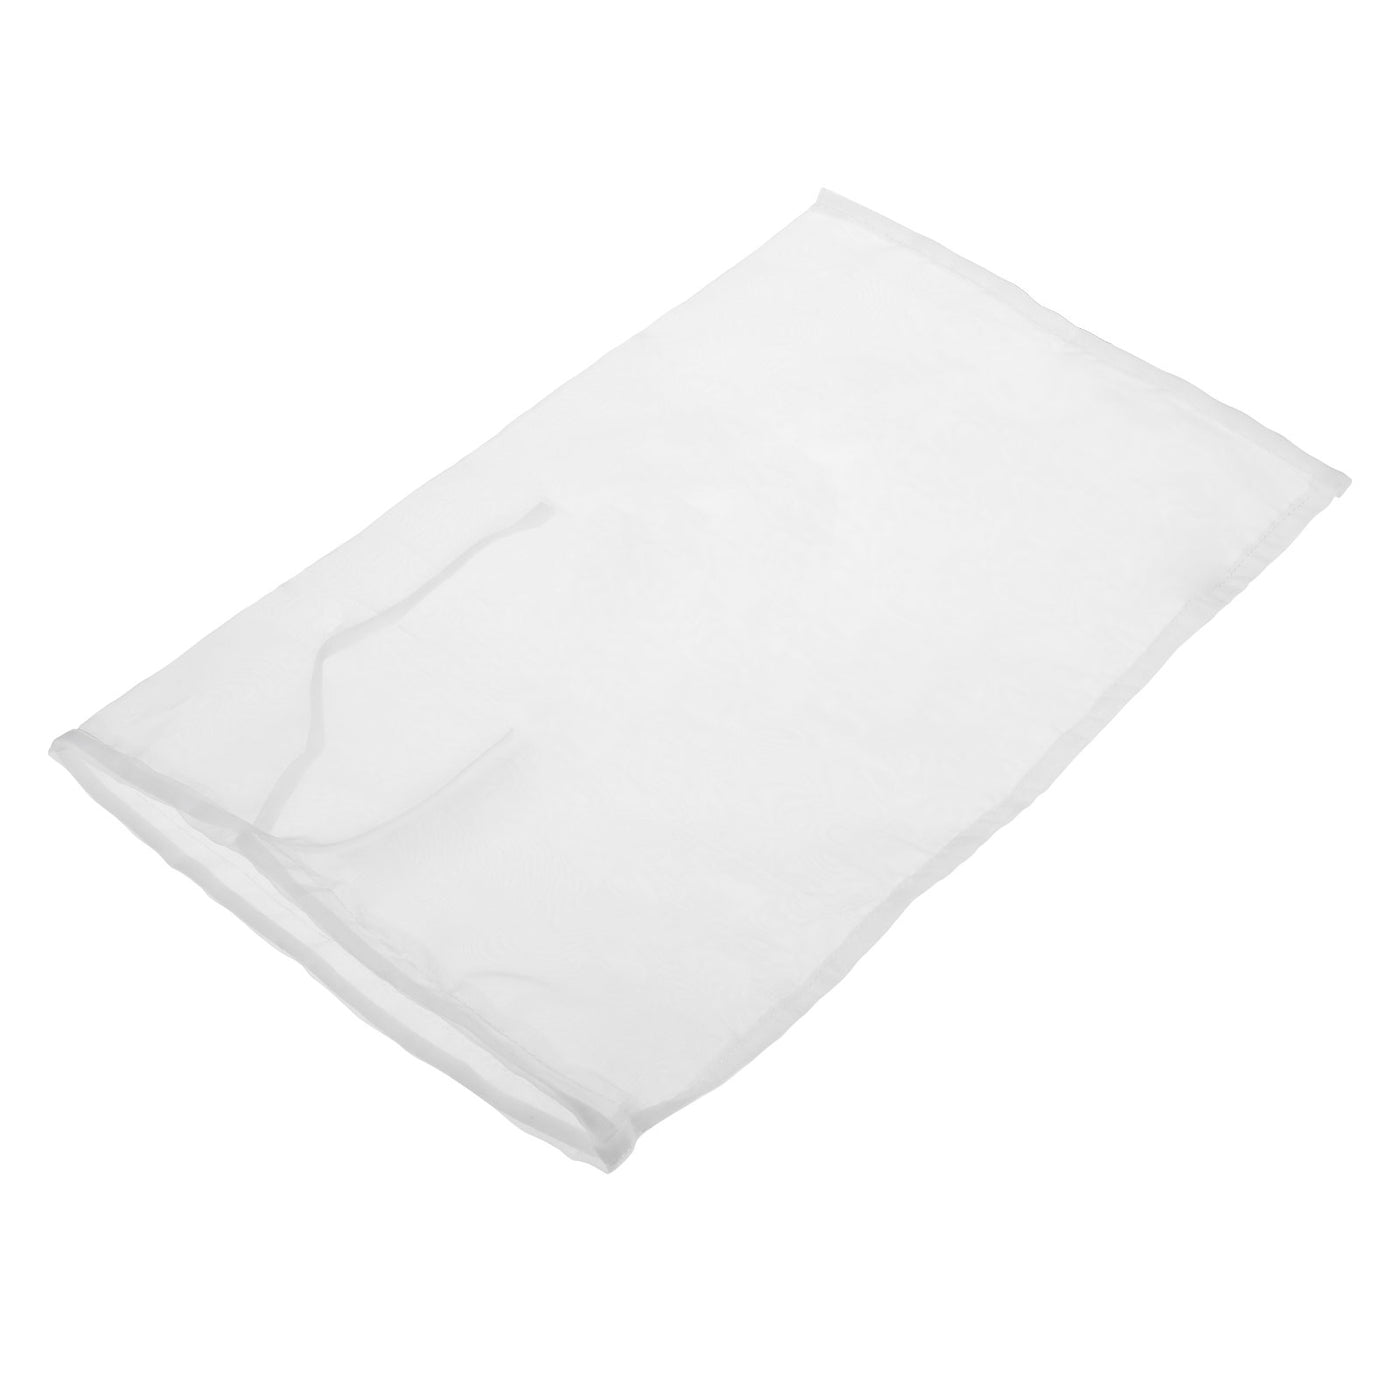 Uxcell Uxcell Paint Filter Bag 200 Mesh (17.7"x11.8") Nylon Strainer for Filtering Paint